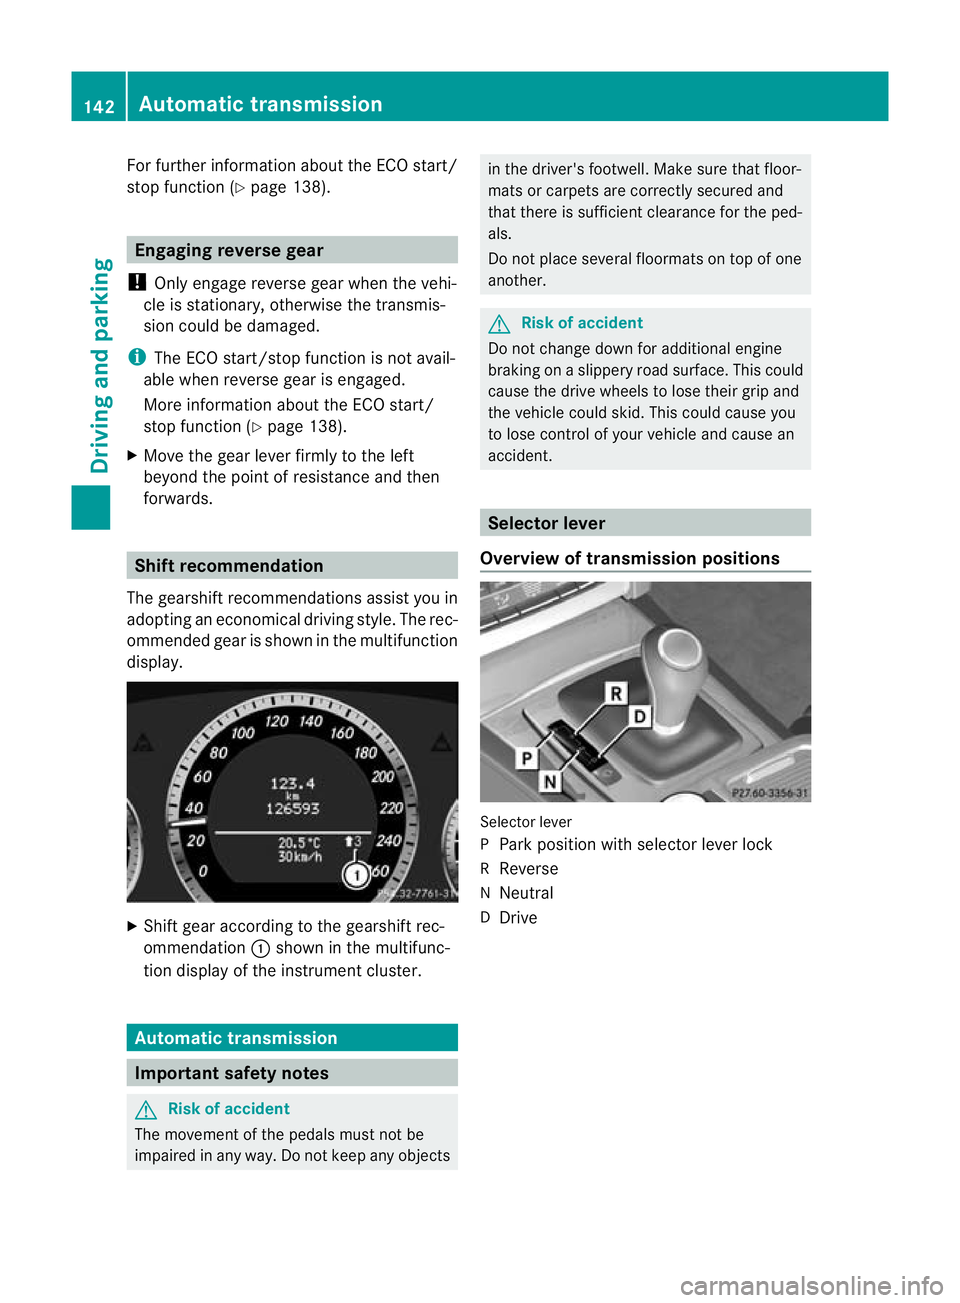 MERCEDES-BENZ E-CLASS CABRIOLET 2010  Owners Manual For further information abou
tthe ECO start/
stop func tion (Y page 138). Engaging reverse gear
! Only engage reverse gear when the vehi-
cle is stationary, otherwise the transmis-
sion coul dbedamage